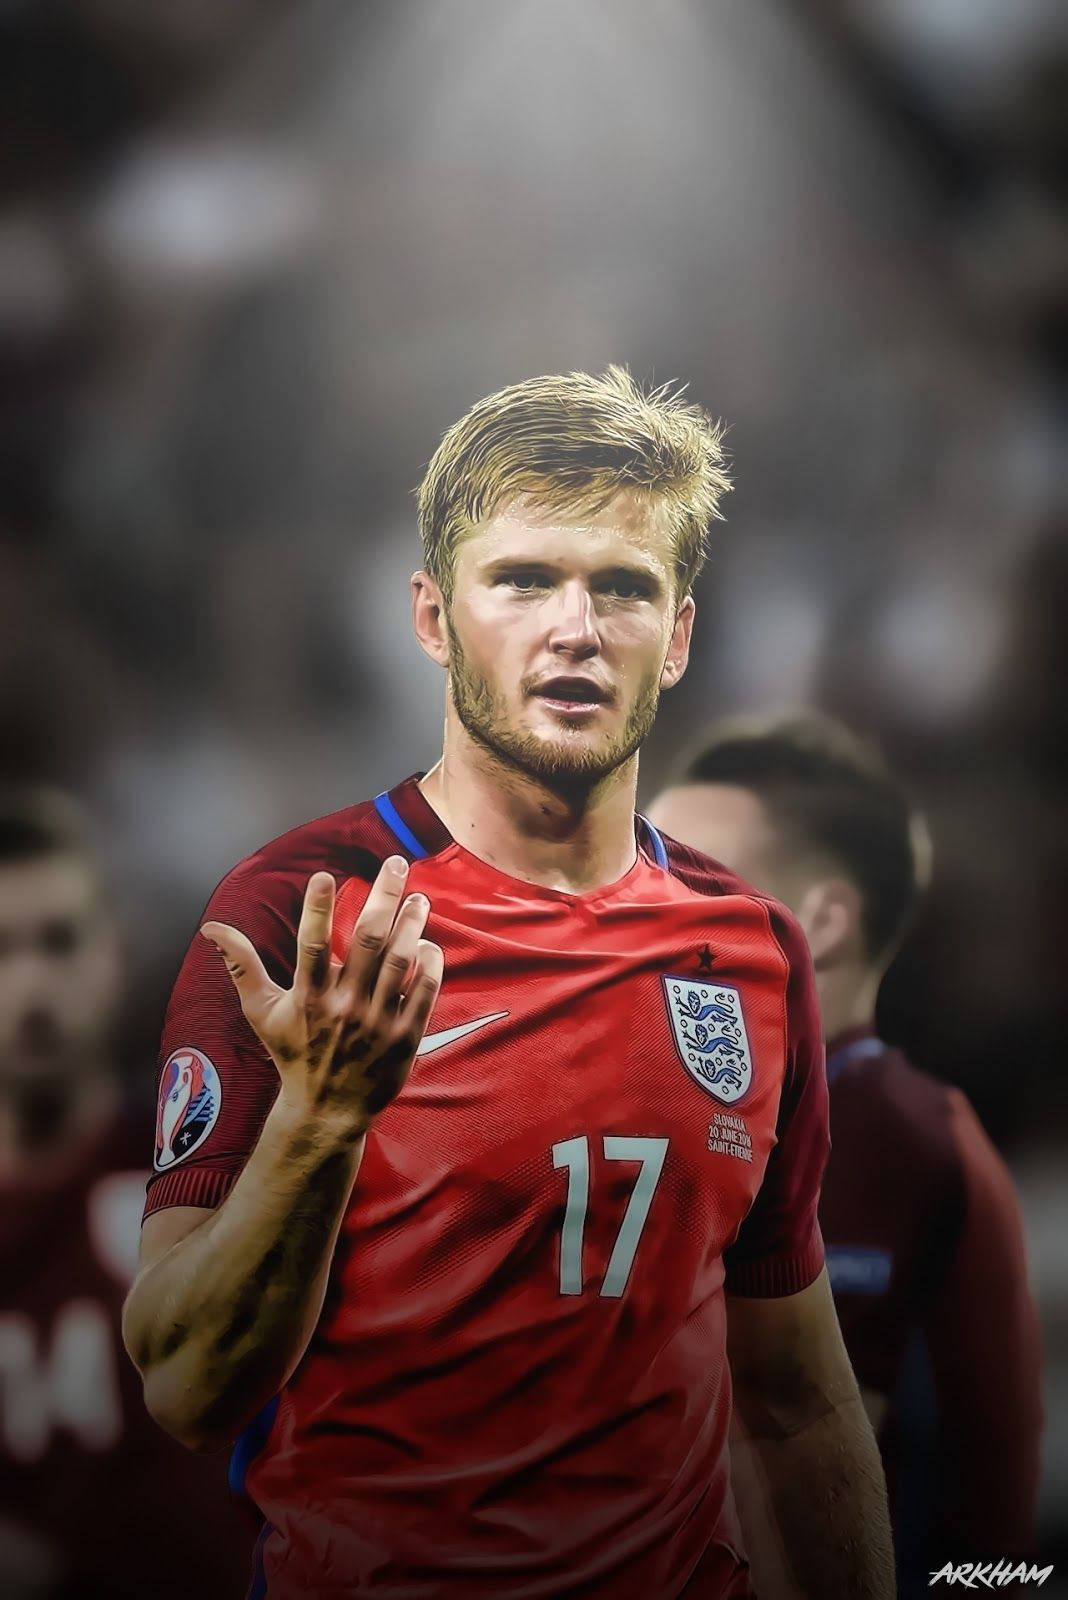 Eric Dier In Action On The Football Field Wallpaper